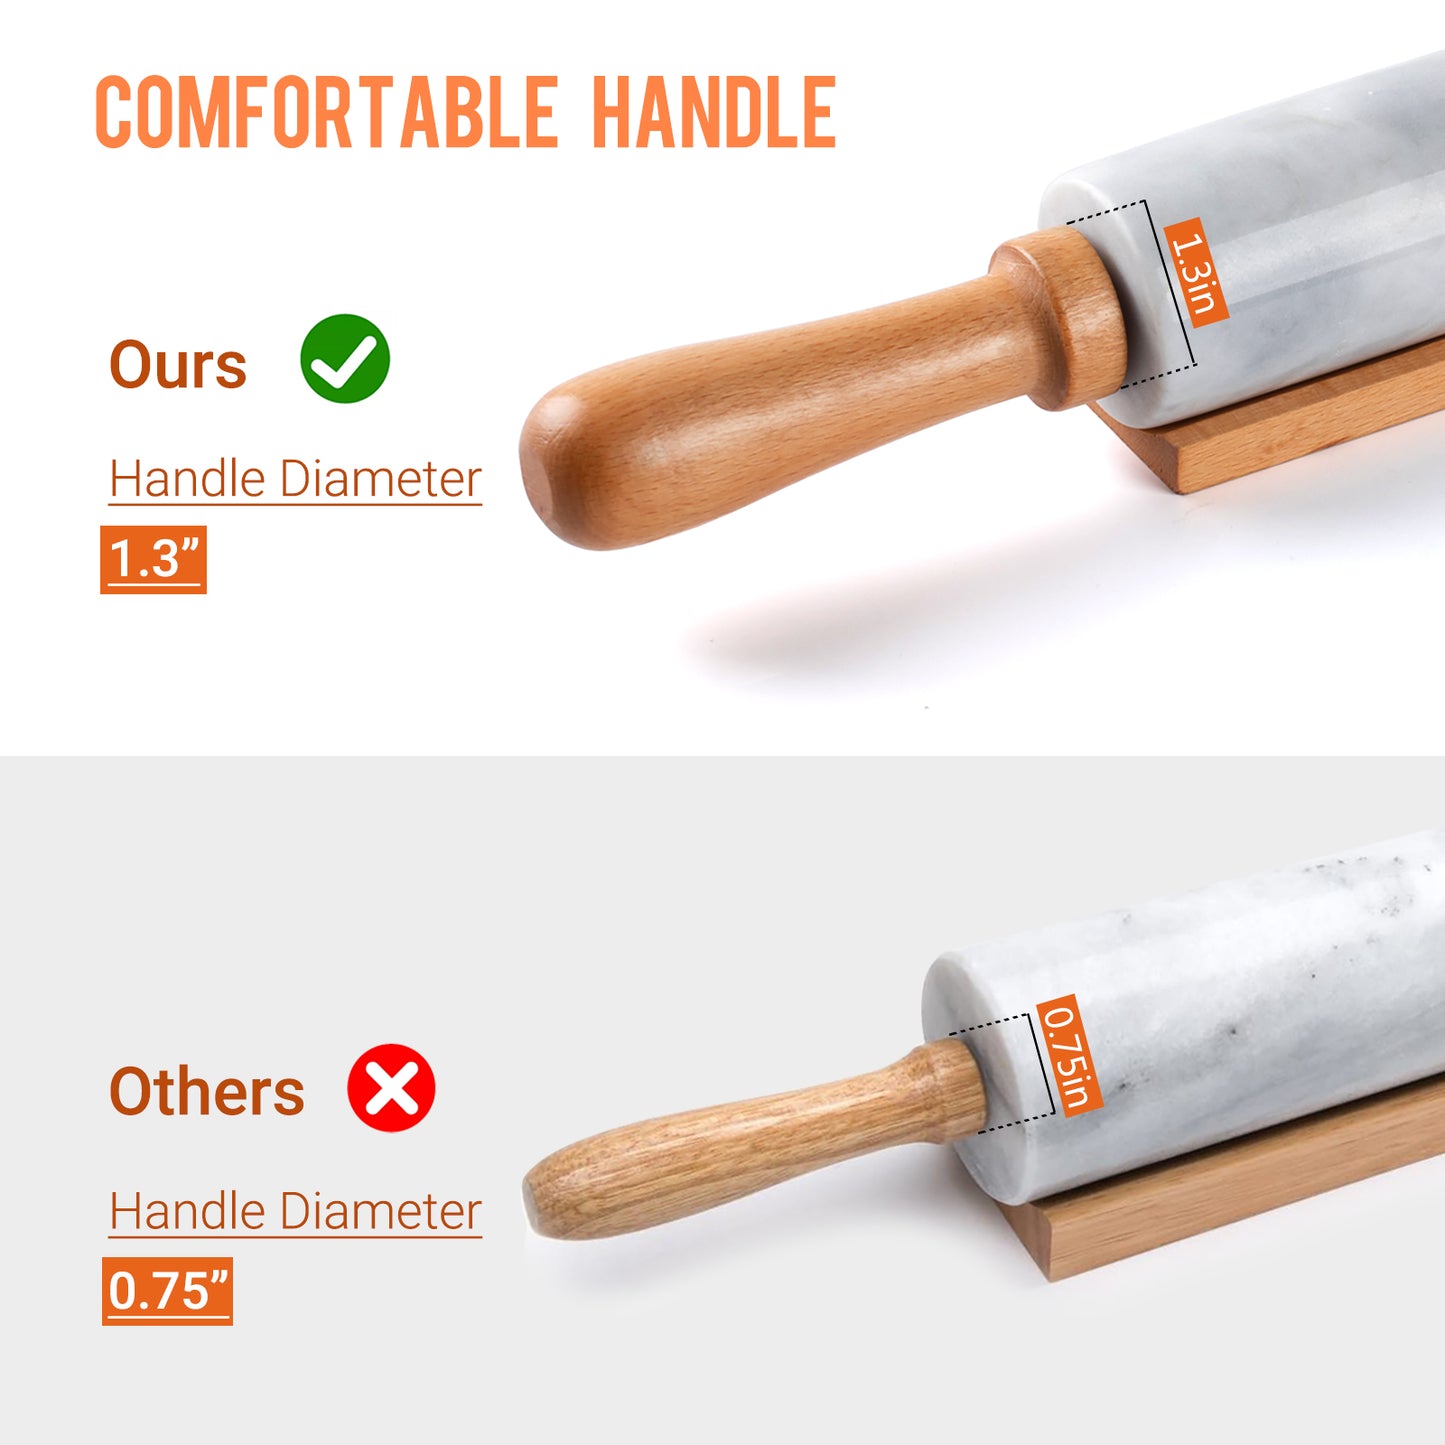 Solid Marble Rolling Pin Set